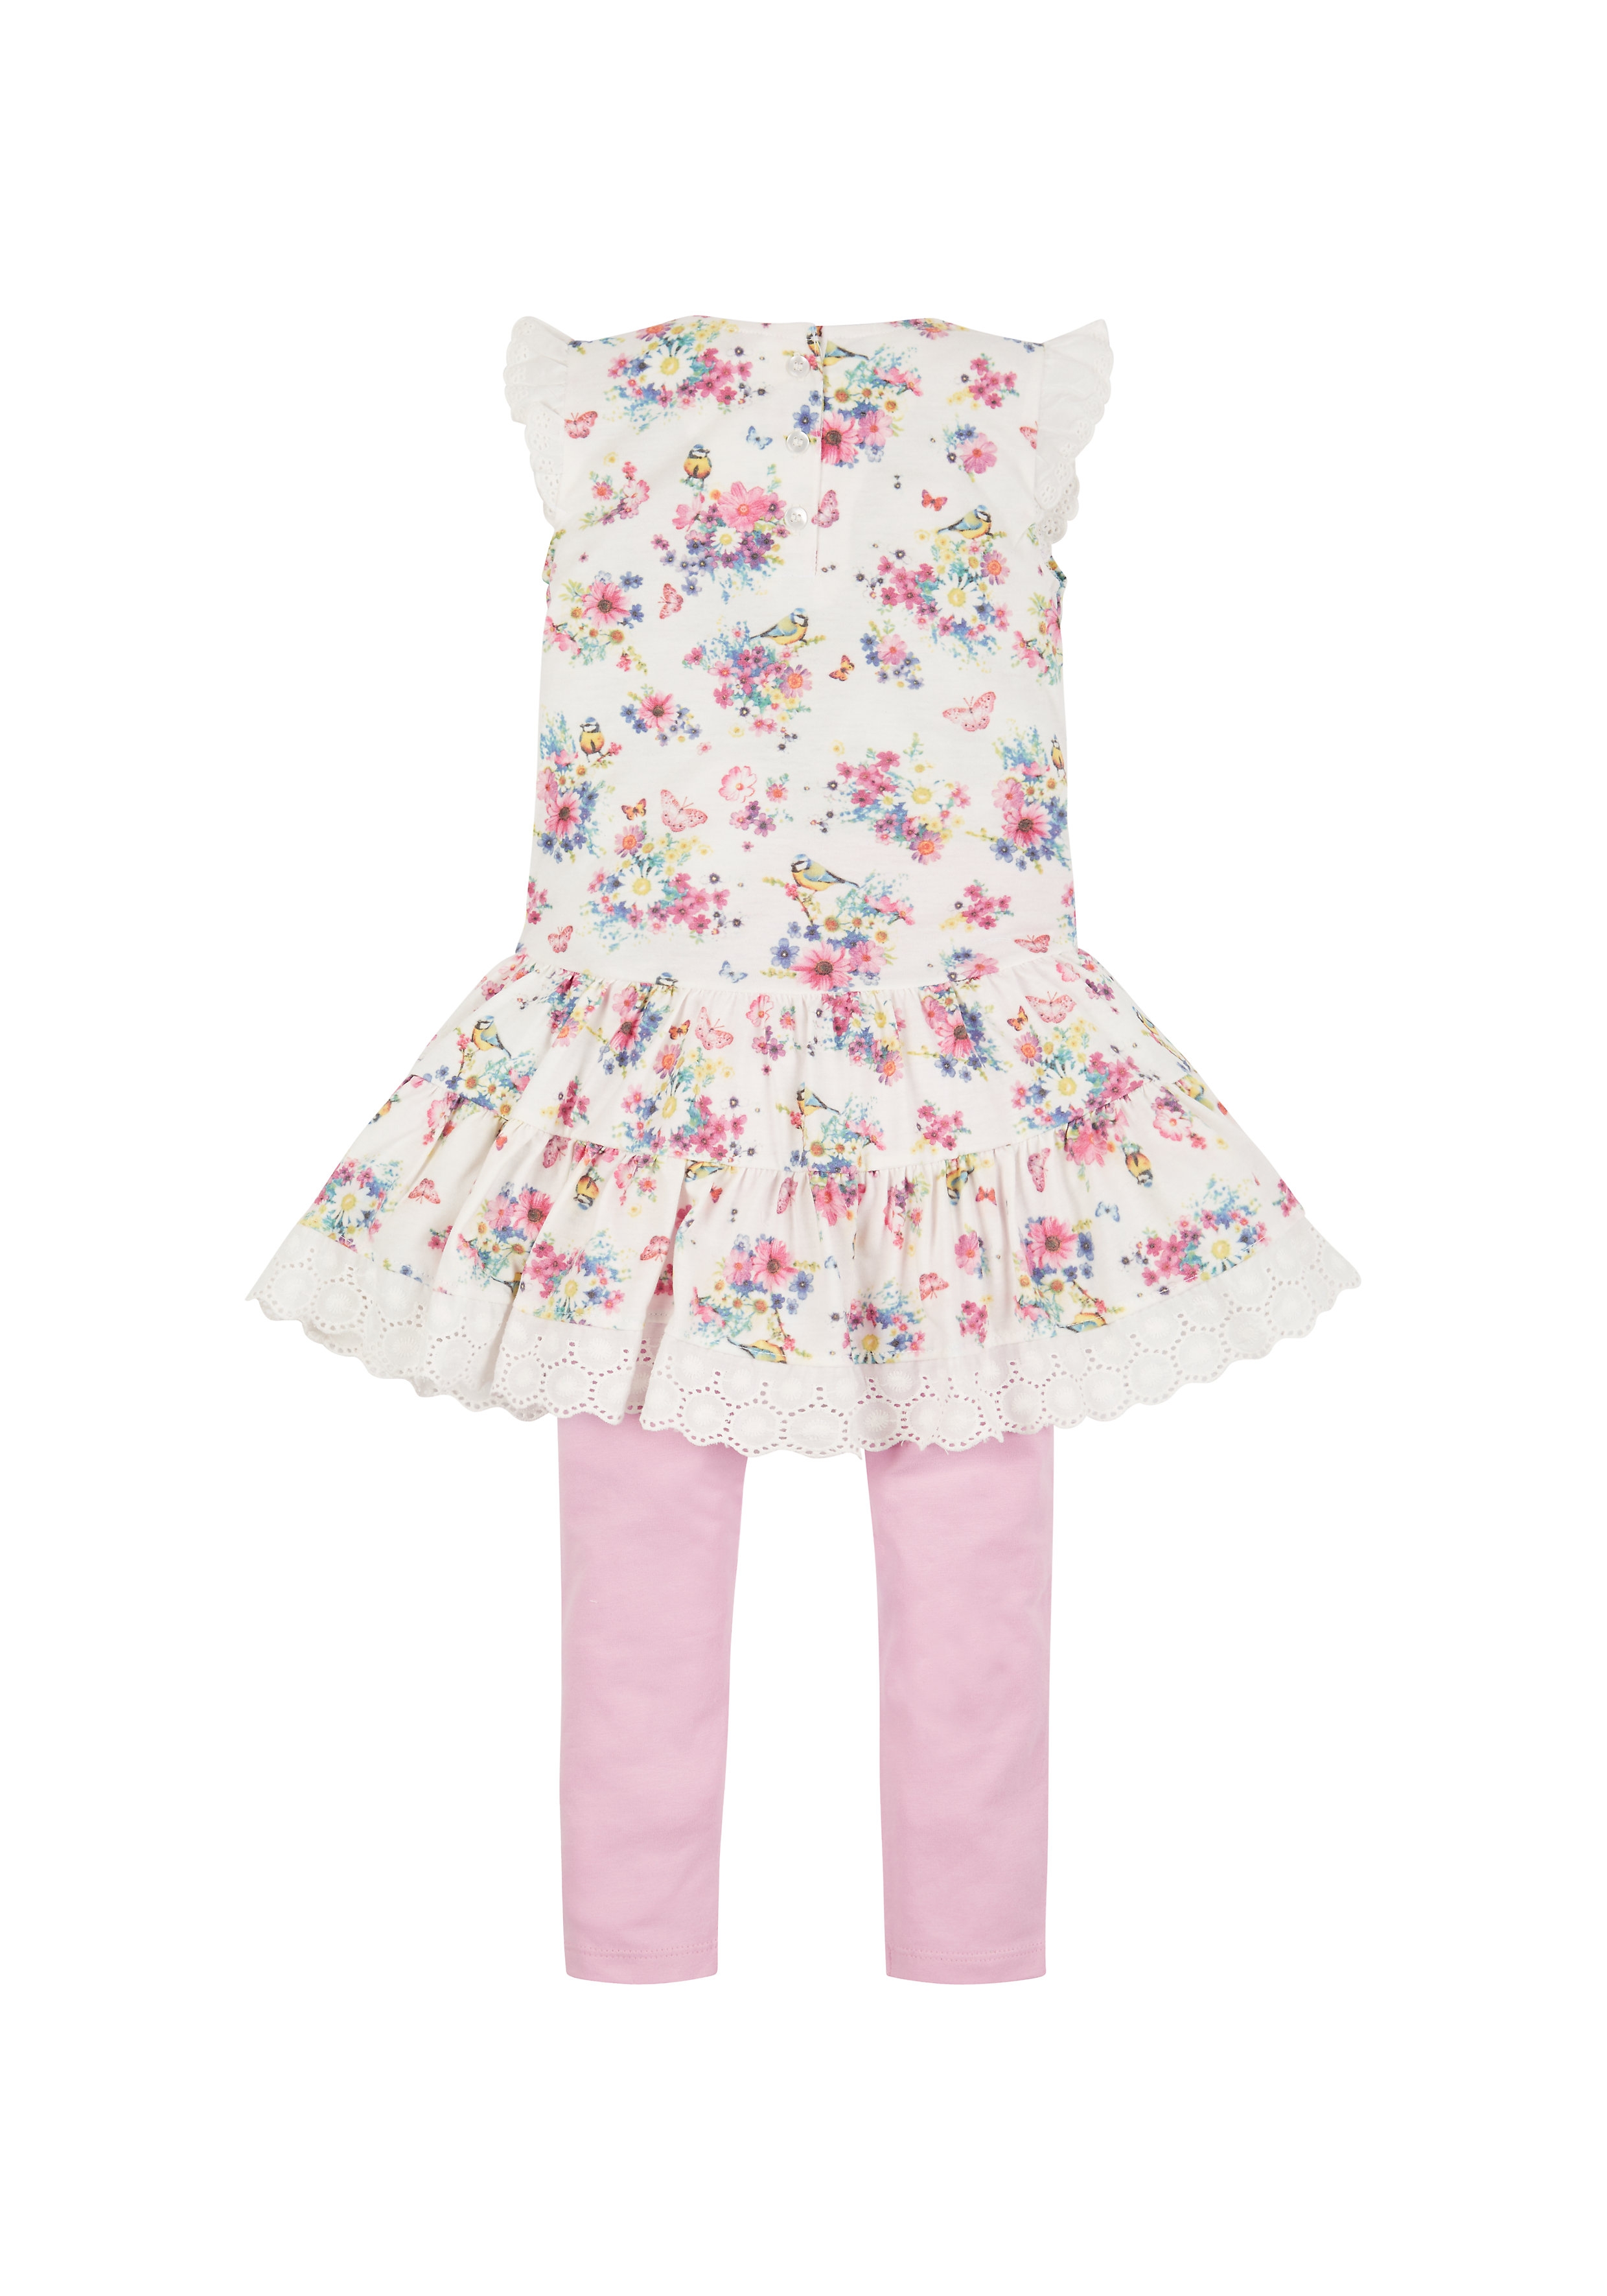 Mothercare | Girls Floral Dress And Leggings Set 1